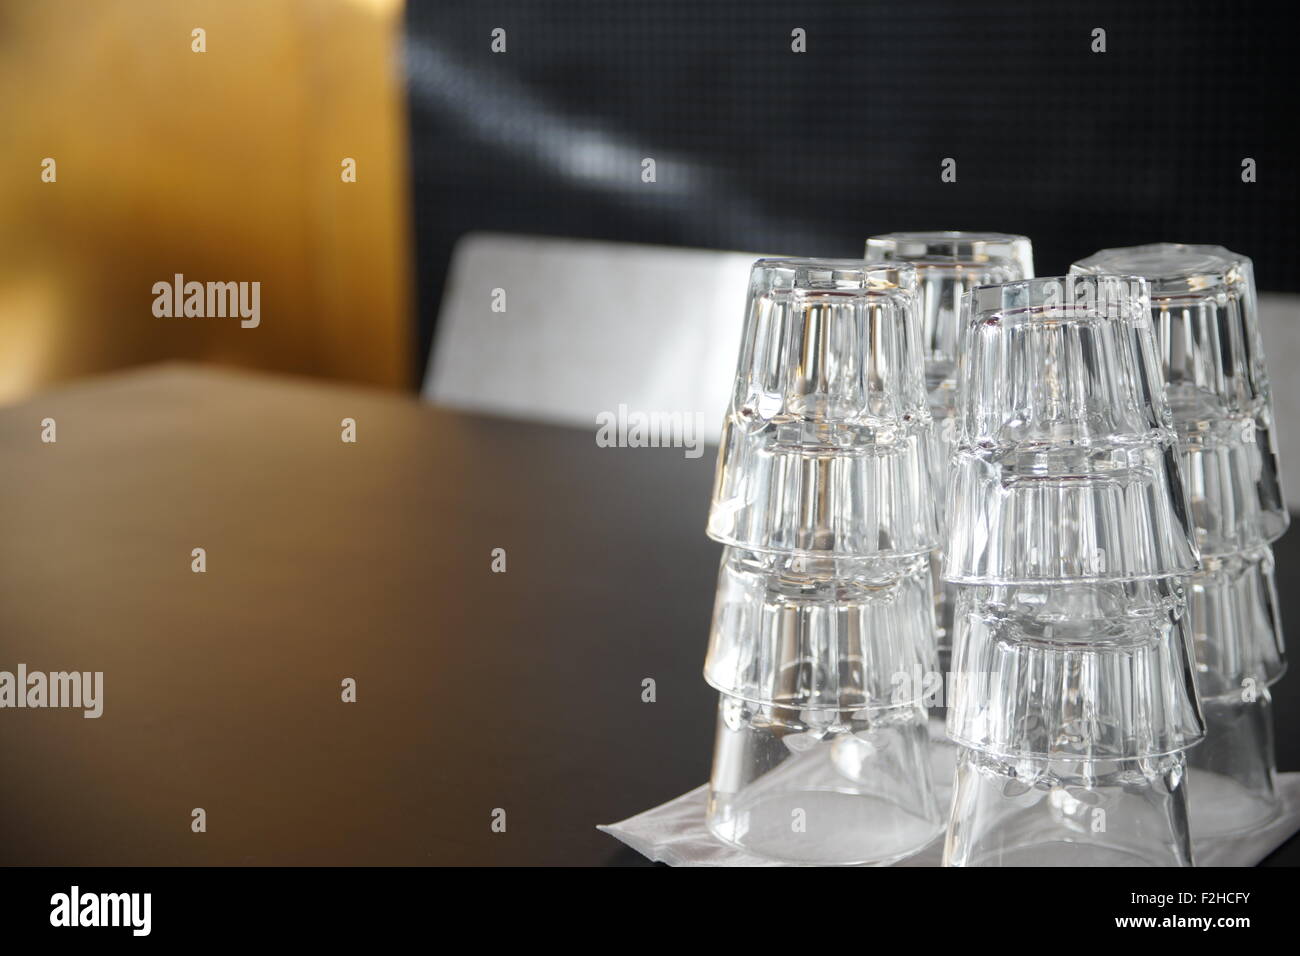 Clean drinking glasses stacked on a black table in a cafe. Stock Photo